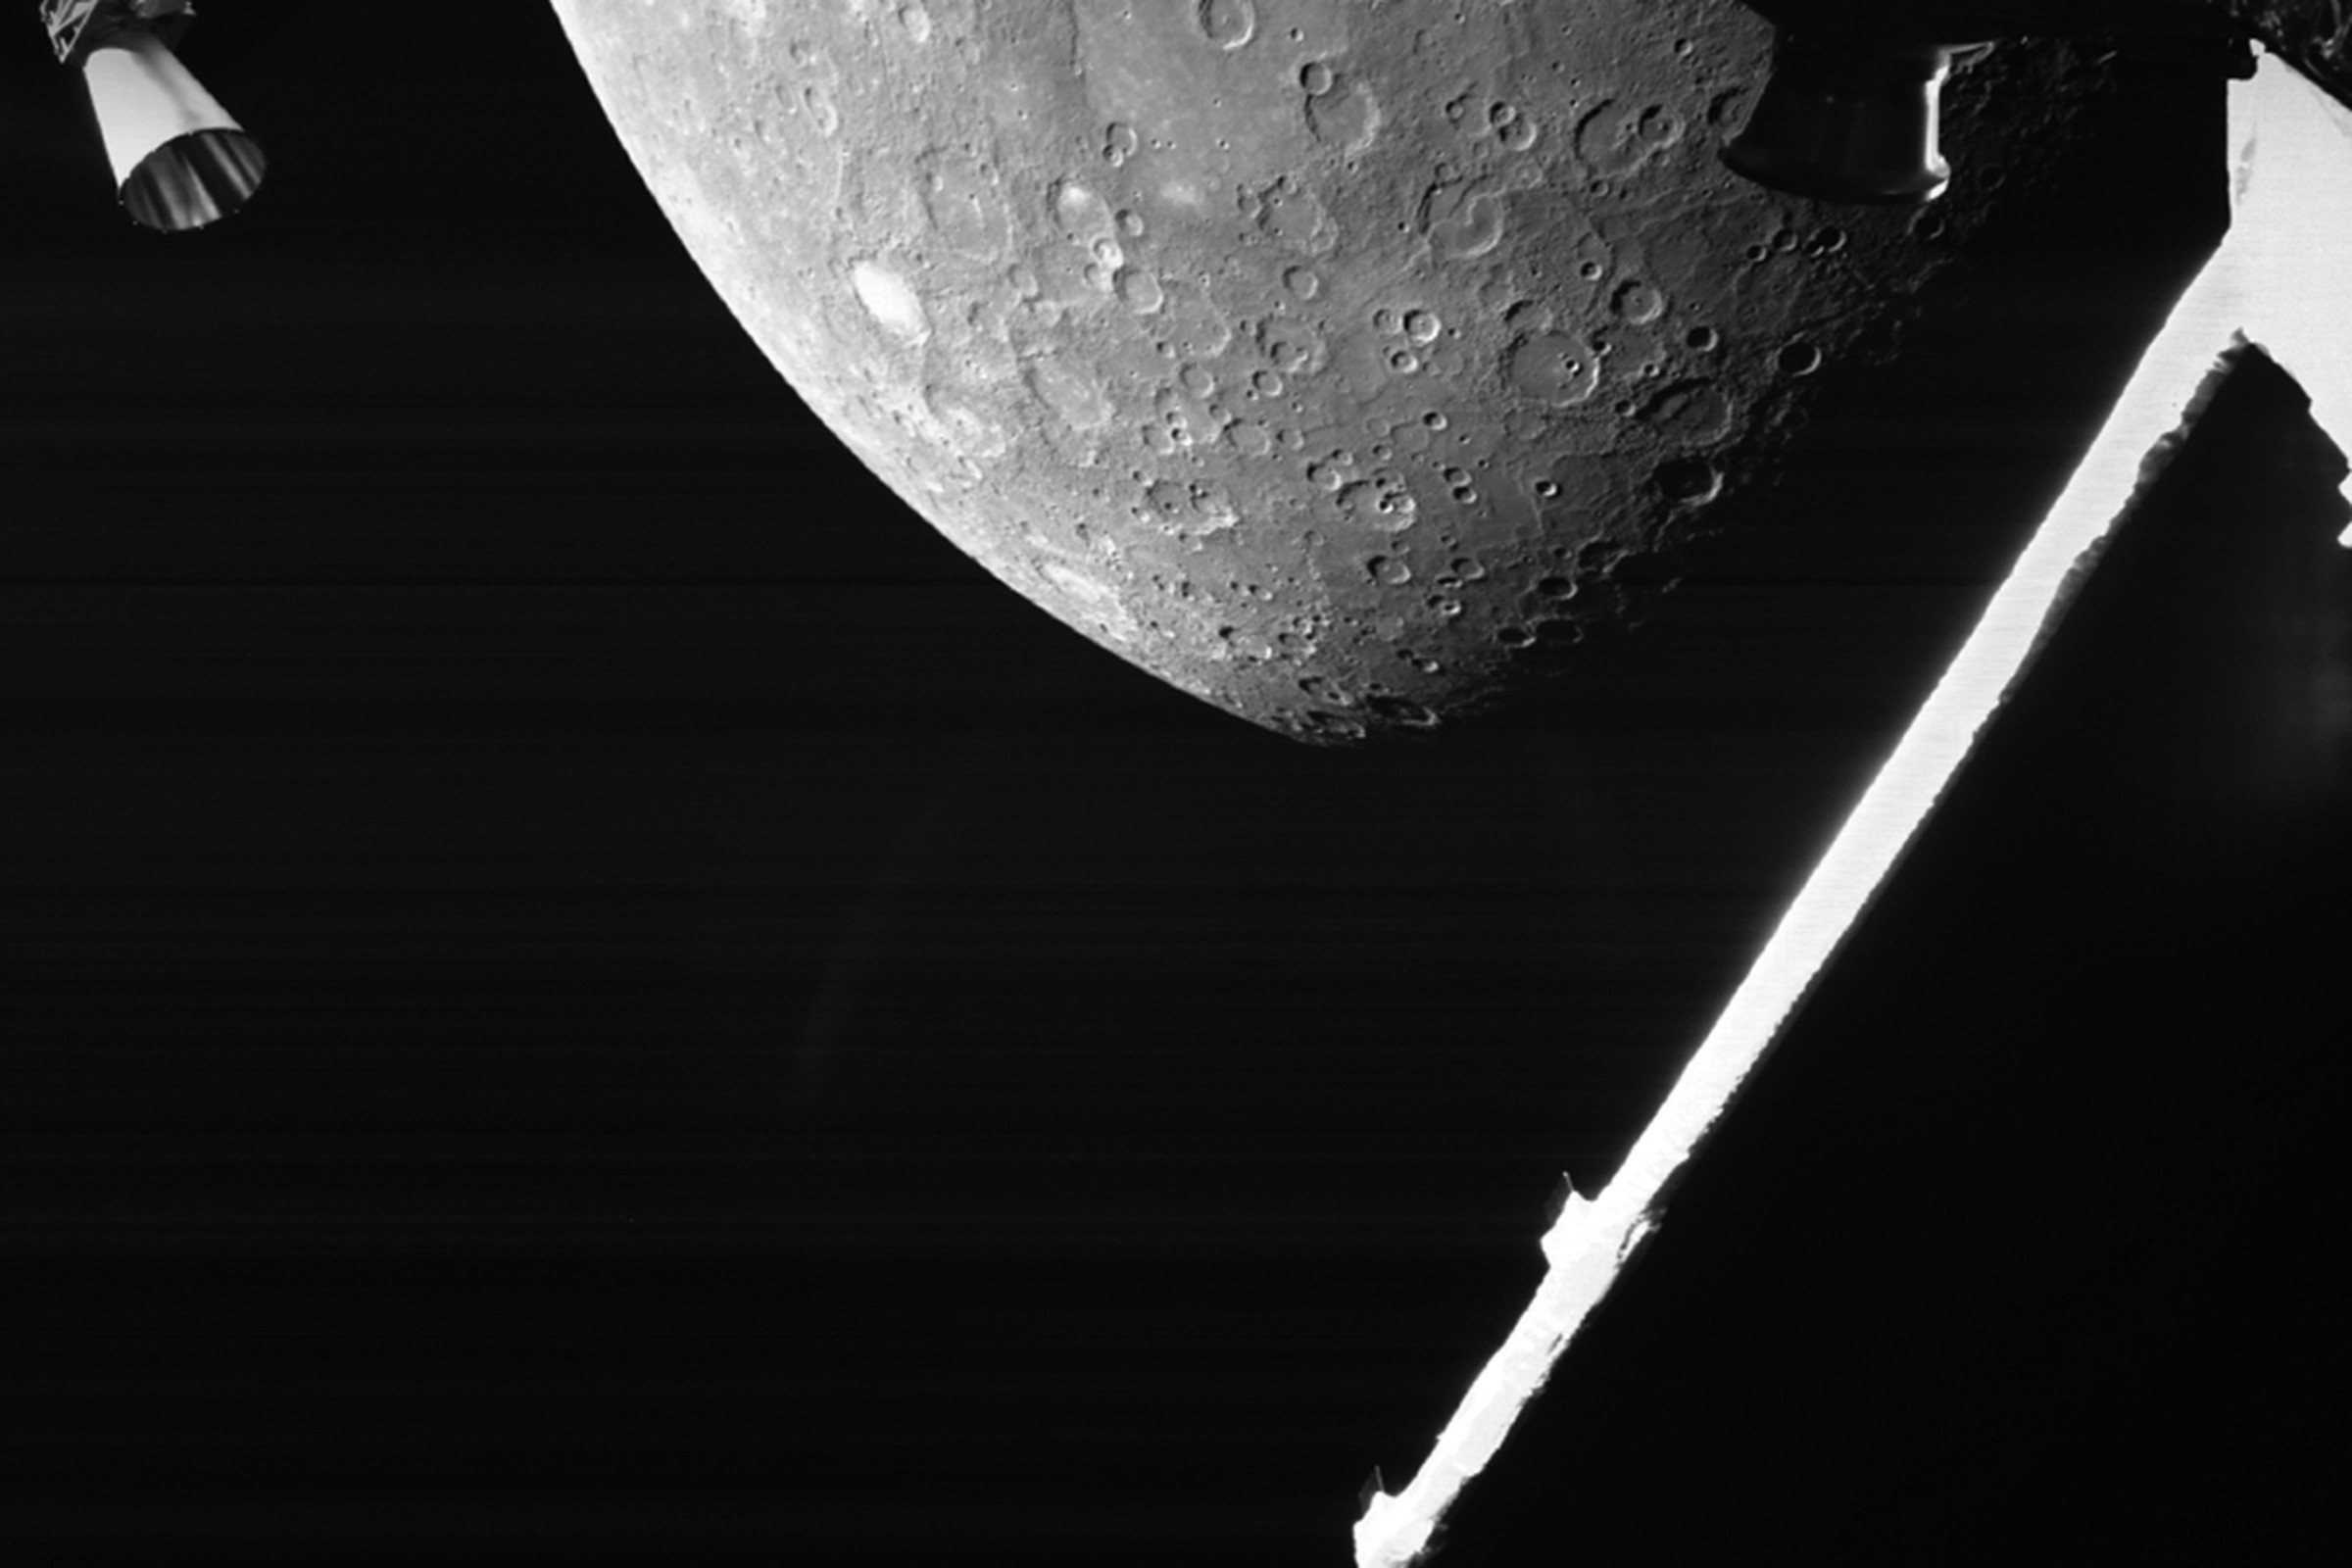 The BepiColombo mission snapped this photo of Mercury on October 1st.